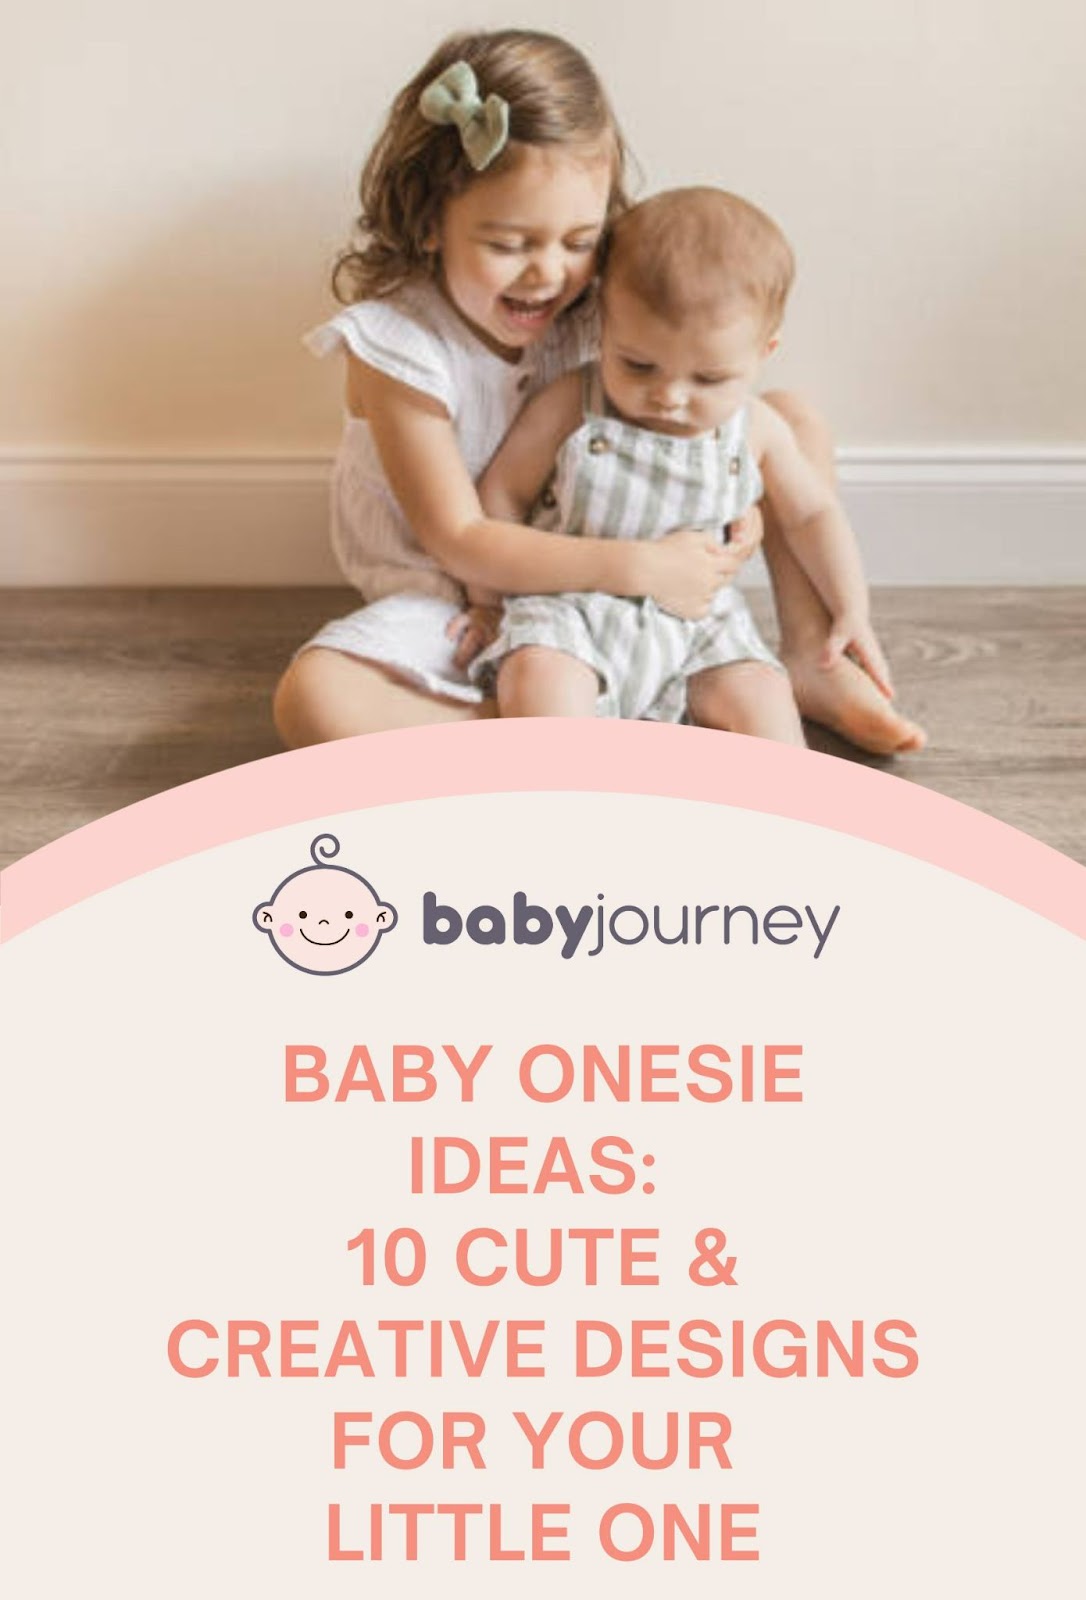 Baby Onesie Ideas: 10 Cute & Creative Designs for Your Little One Pinterest Image - Baby Journey 